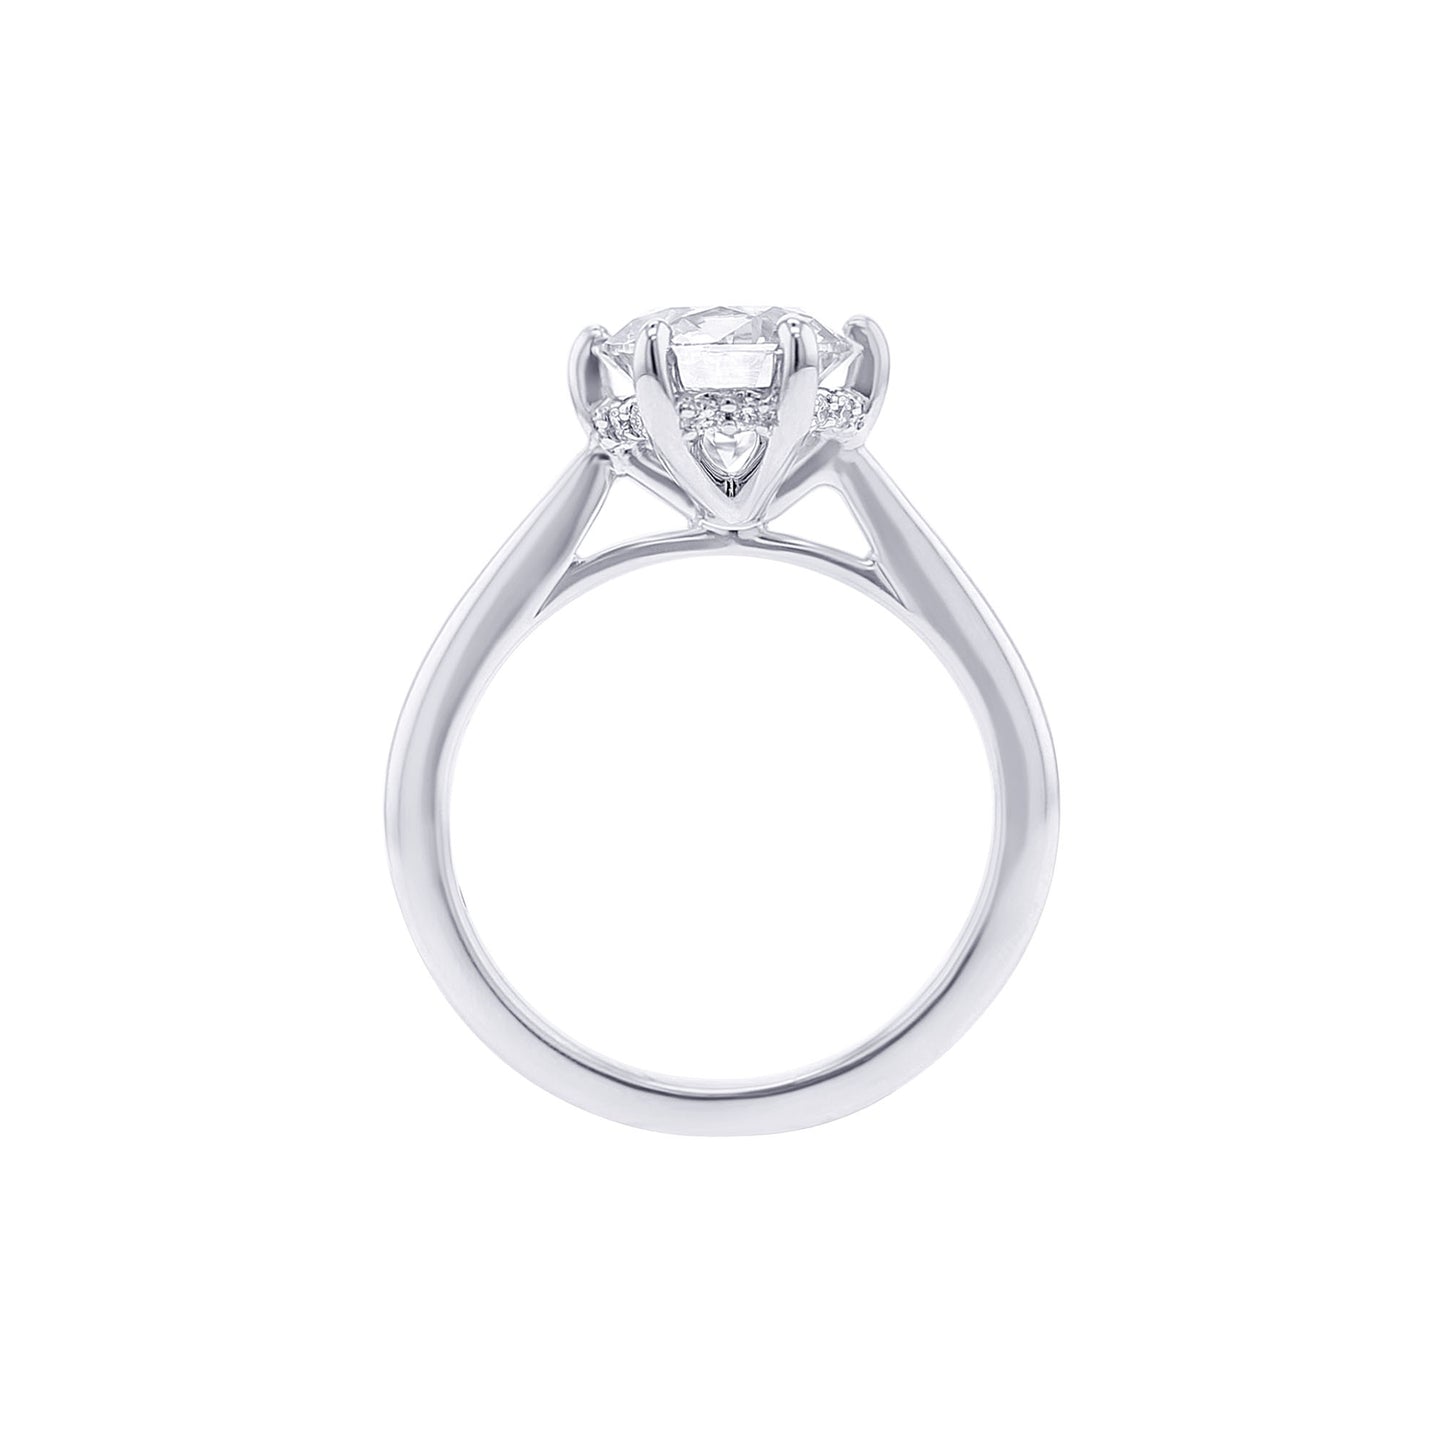 Cambridge Ready for Love Certified Diamond Engagement Ring 1 3/8ct